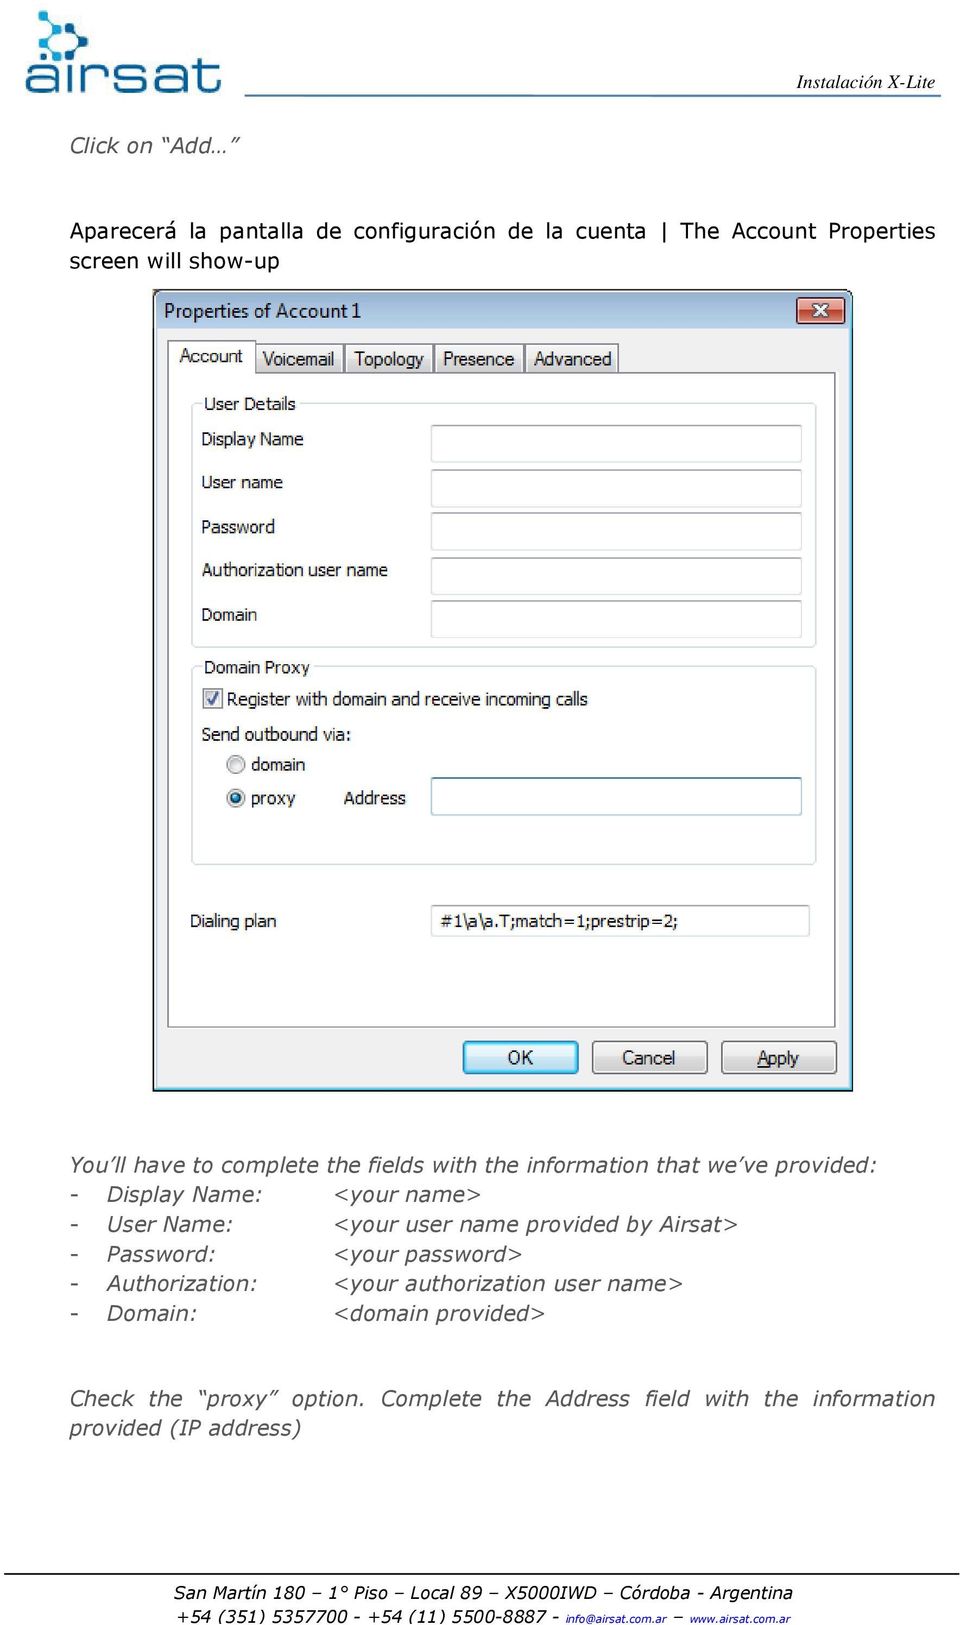 <your user name provided by Airsat> - Password: <your password> - Authorization: <your authorization user name> -